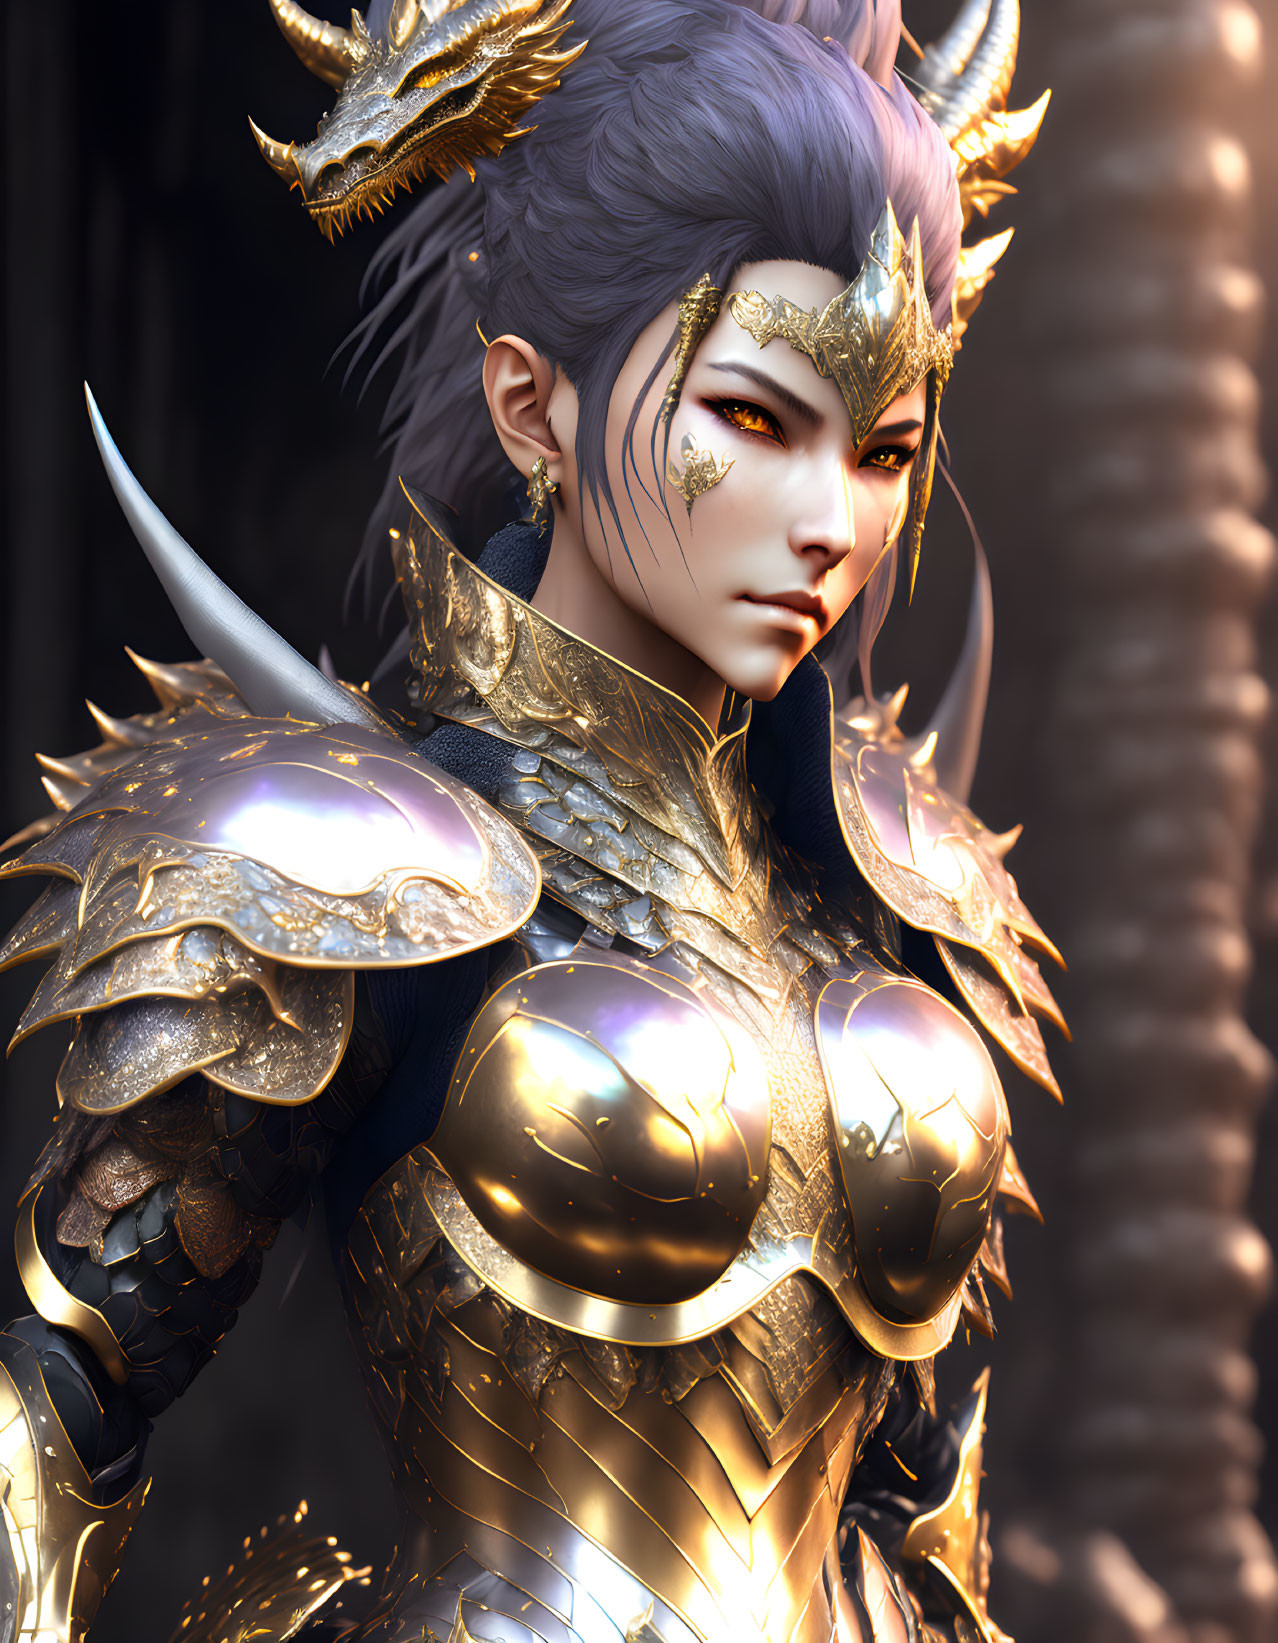 Fantasy warrior woman with dragon-themed armor and intricate facial markings